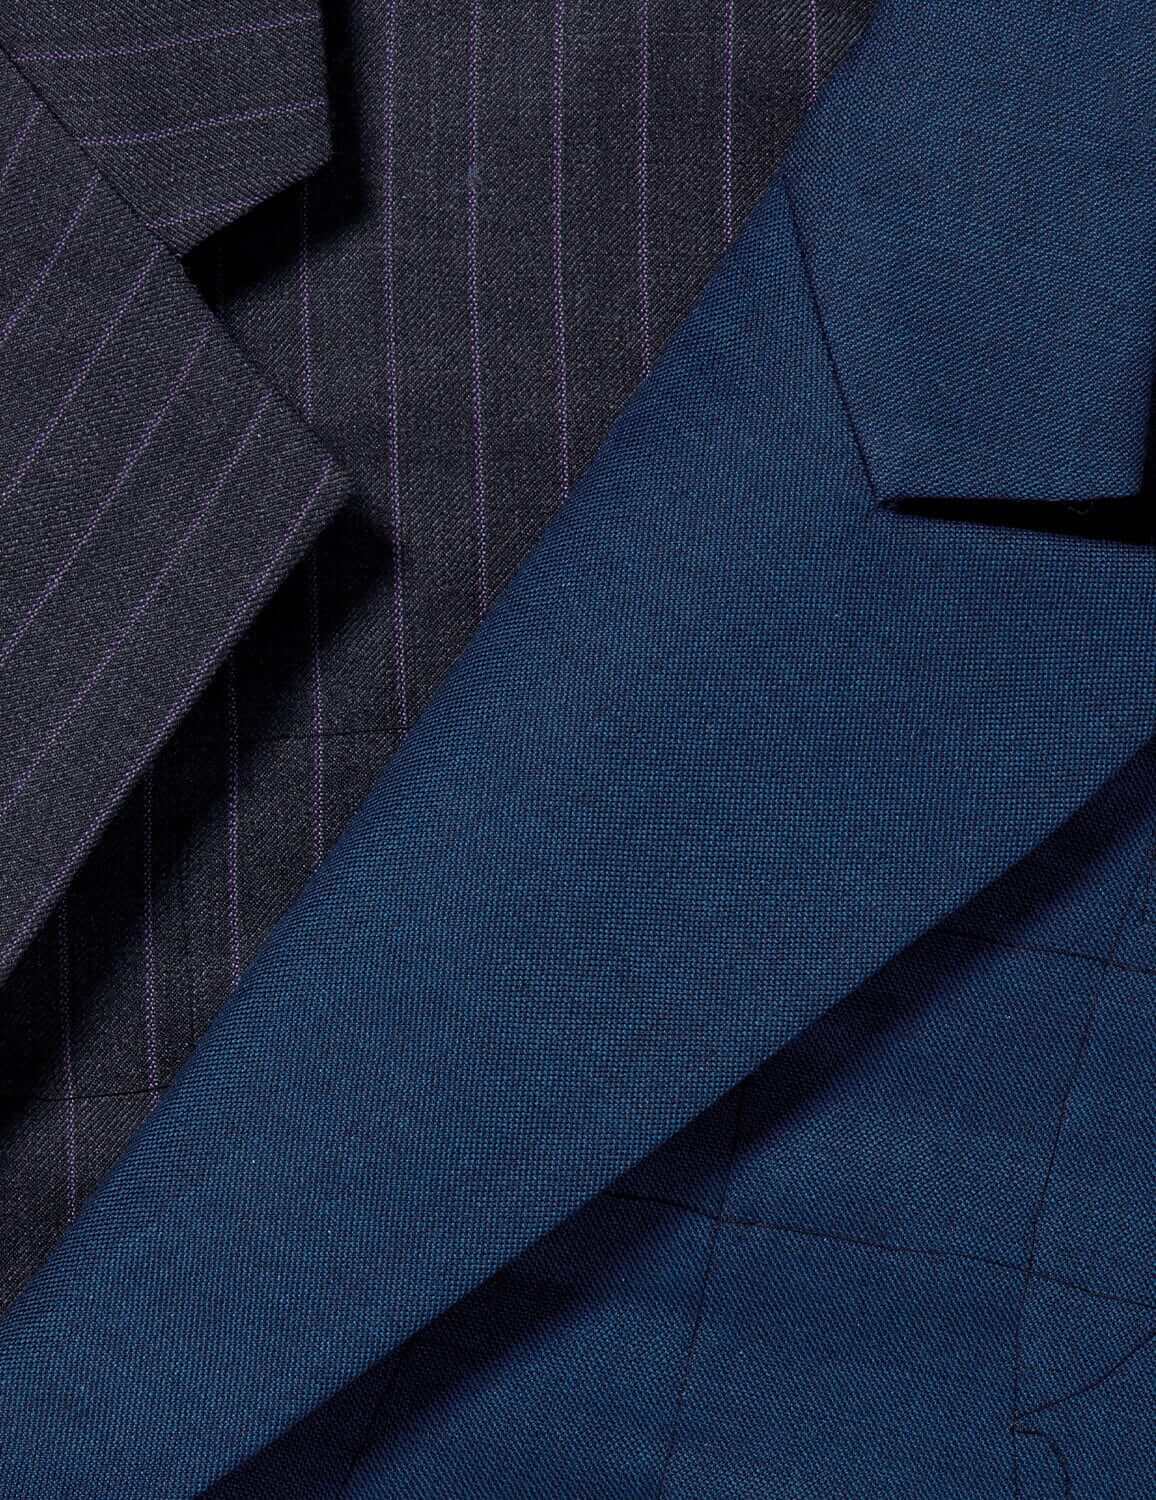 Made to Measure Suits | Charles Tyrwhitt